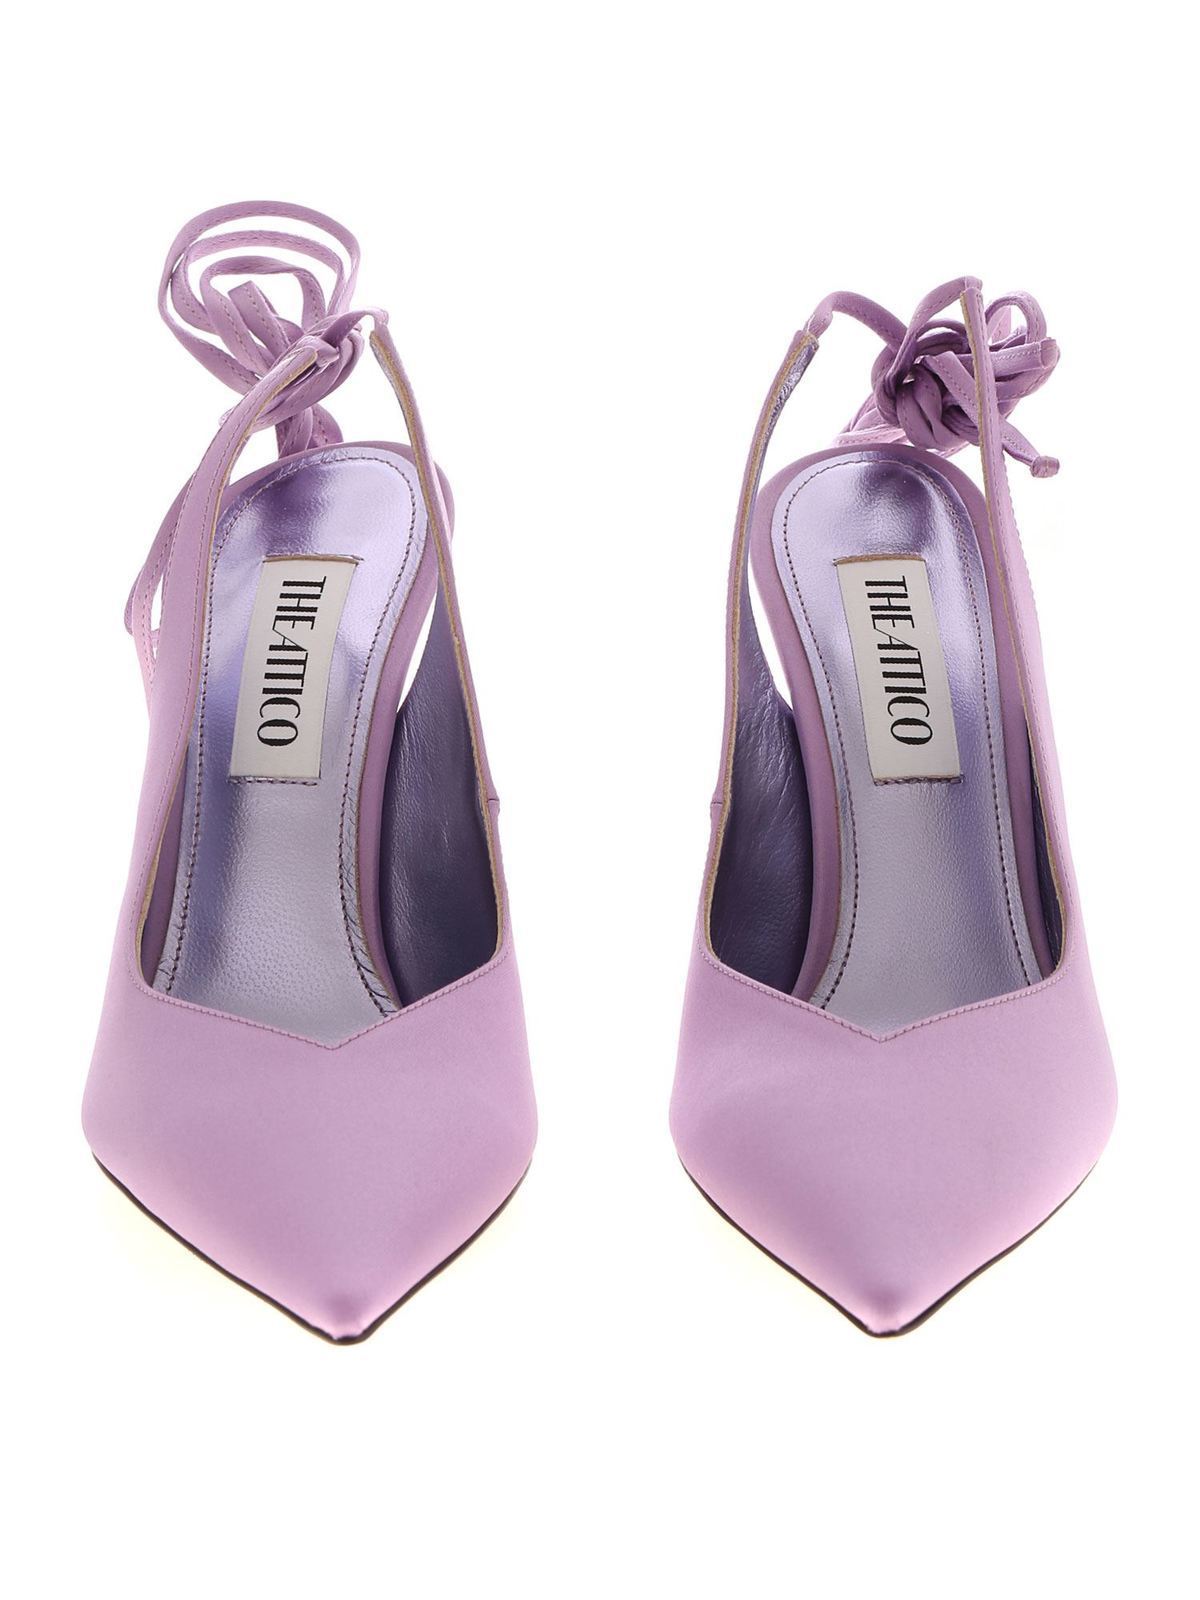 lilac satin shoes